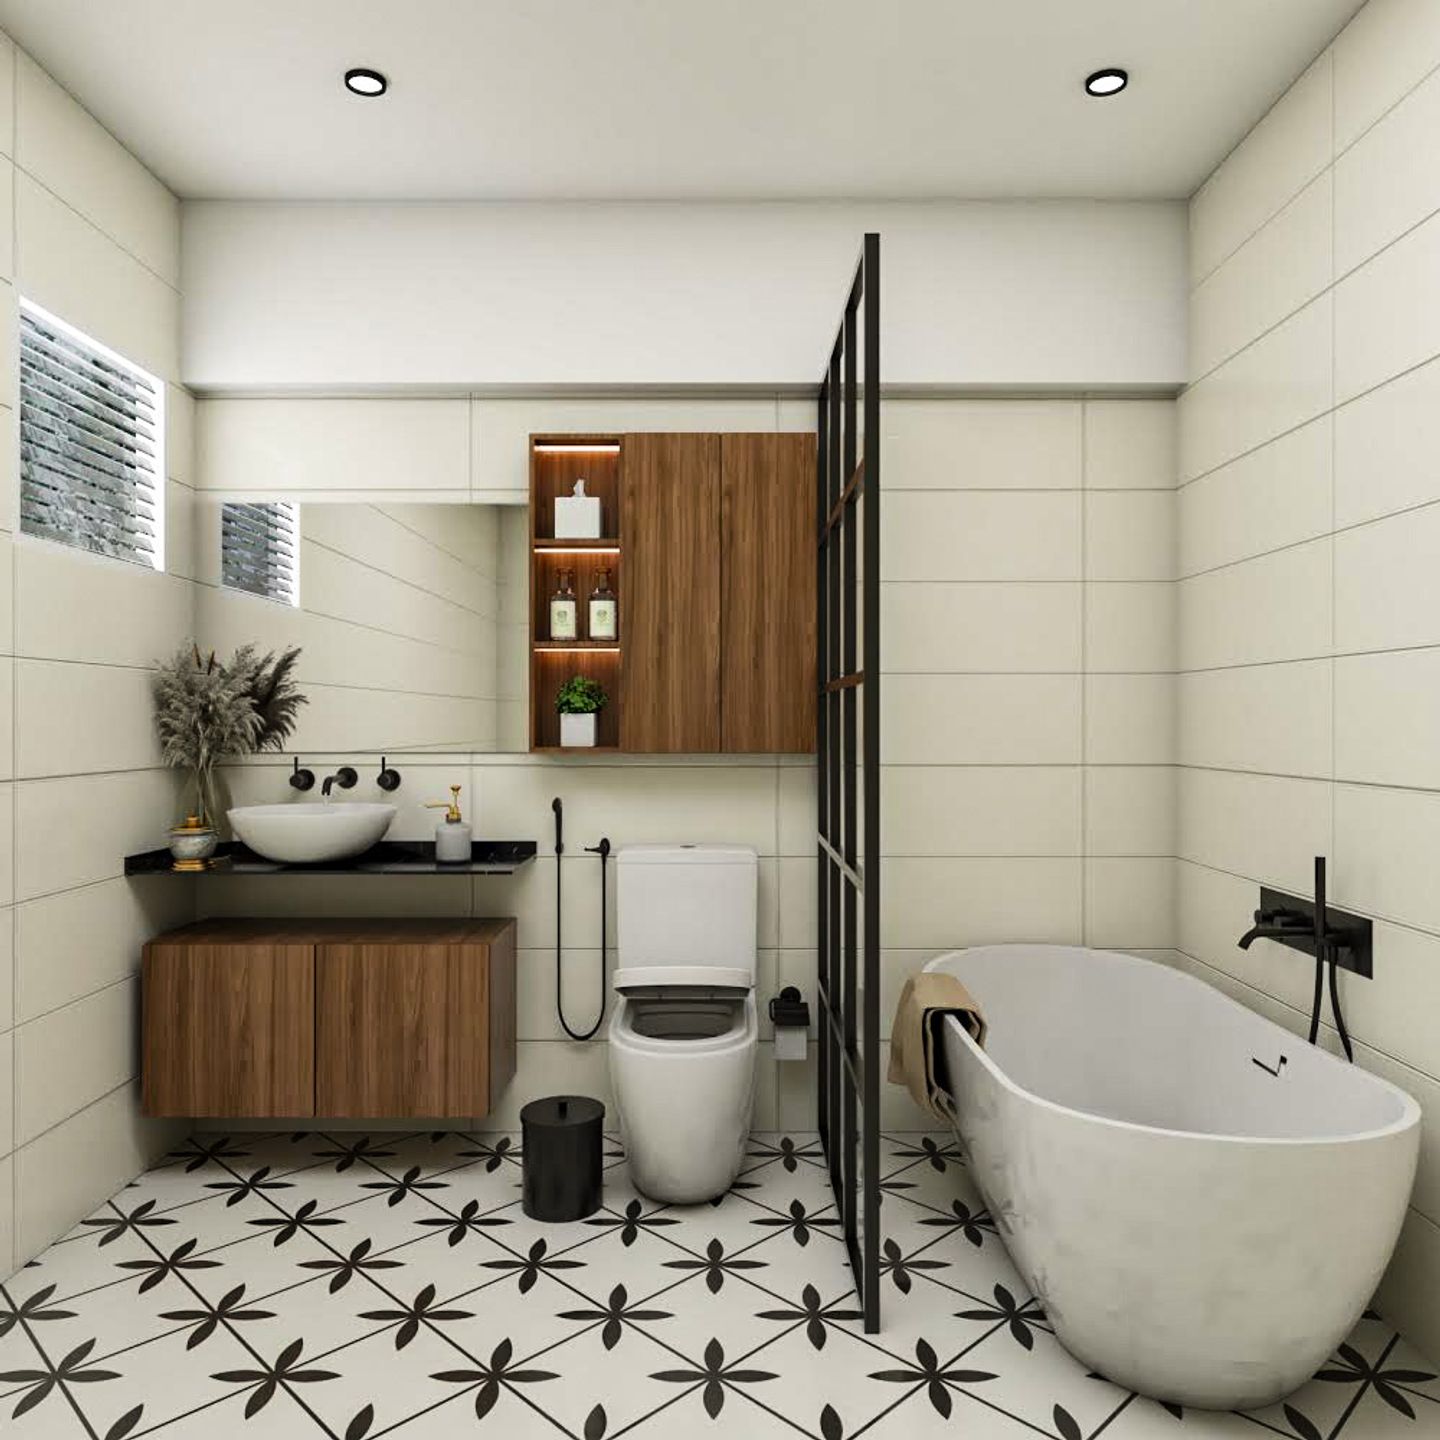 Toilet Floor Tiles With Black And White Moroccan Star Pattern - Livspace